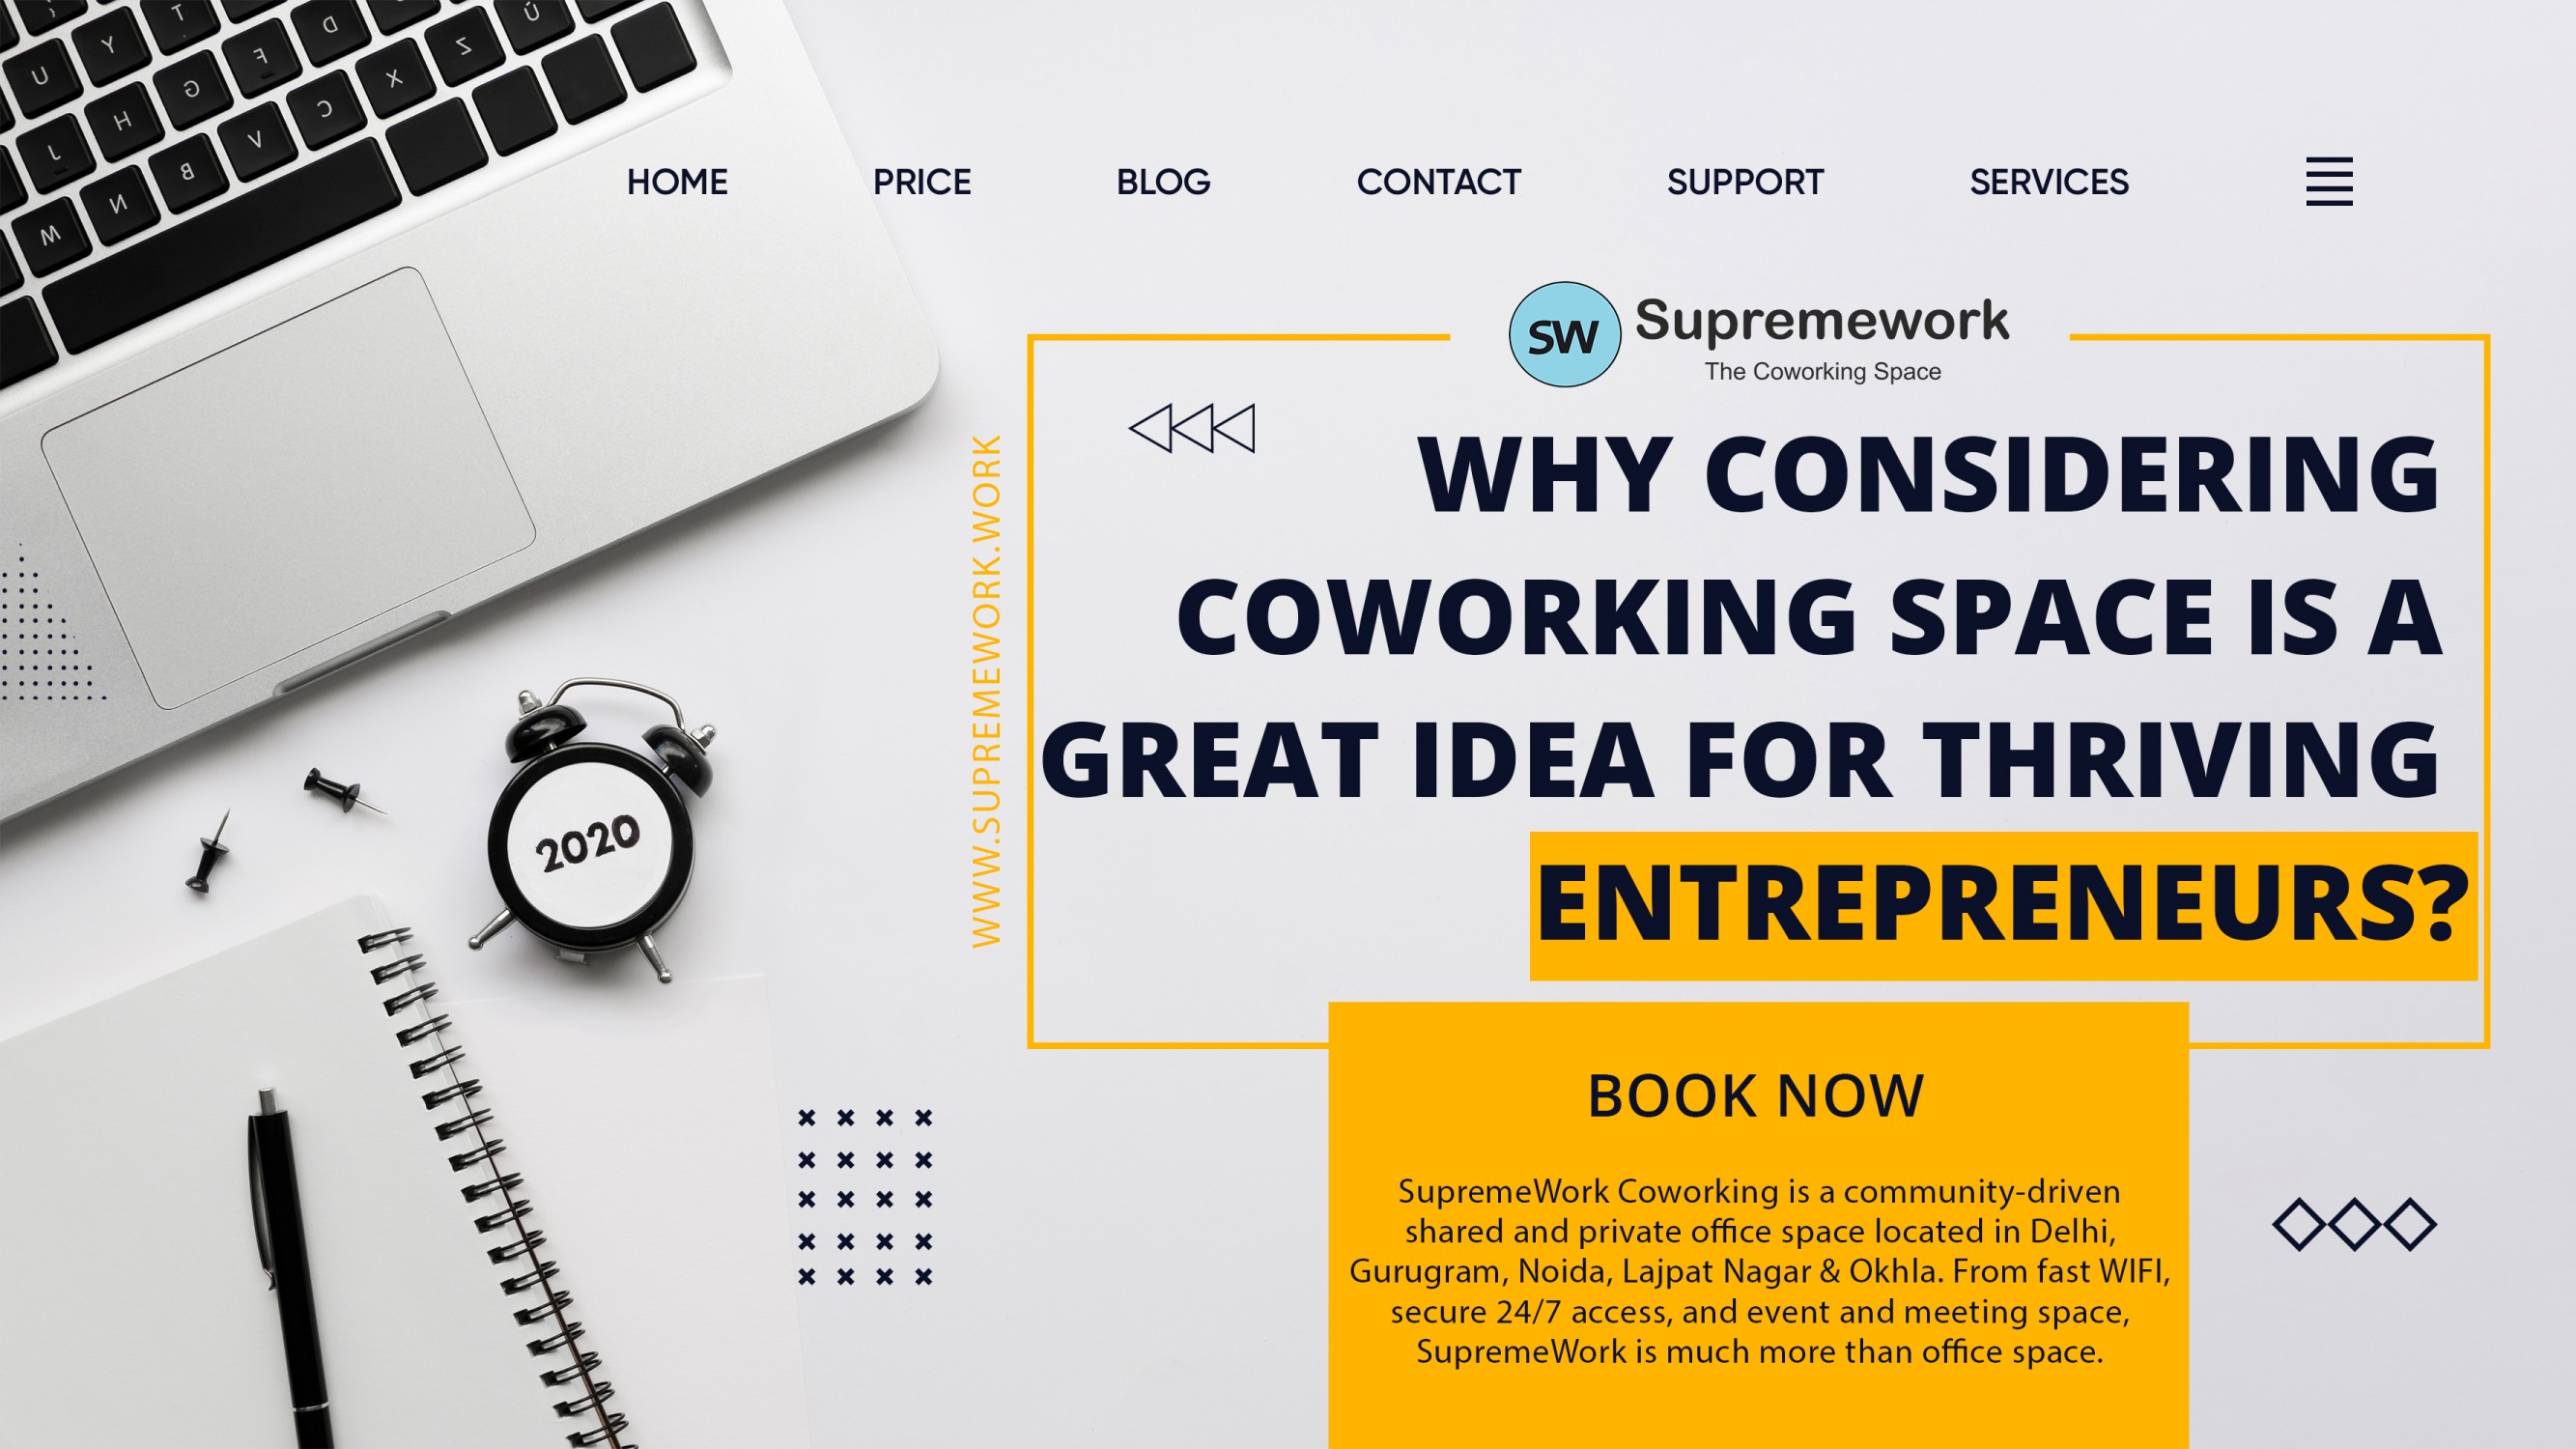 coworking-space-is-an-excellent-idea-for-thriving-entrepreneurs